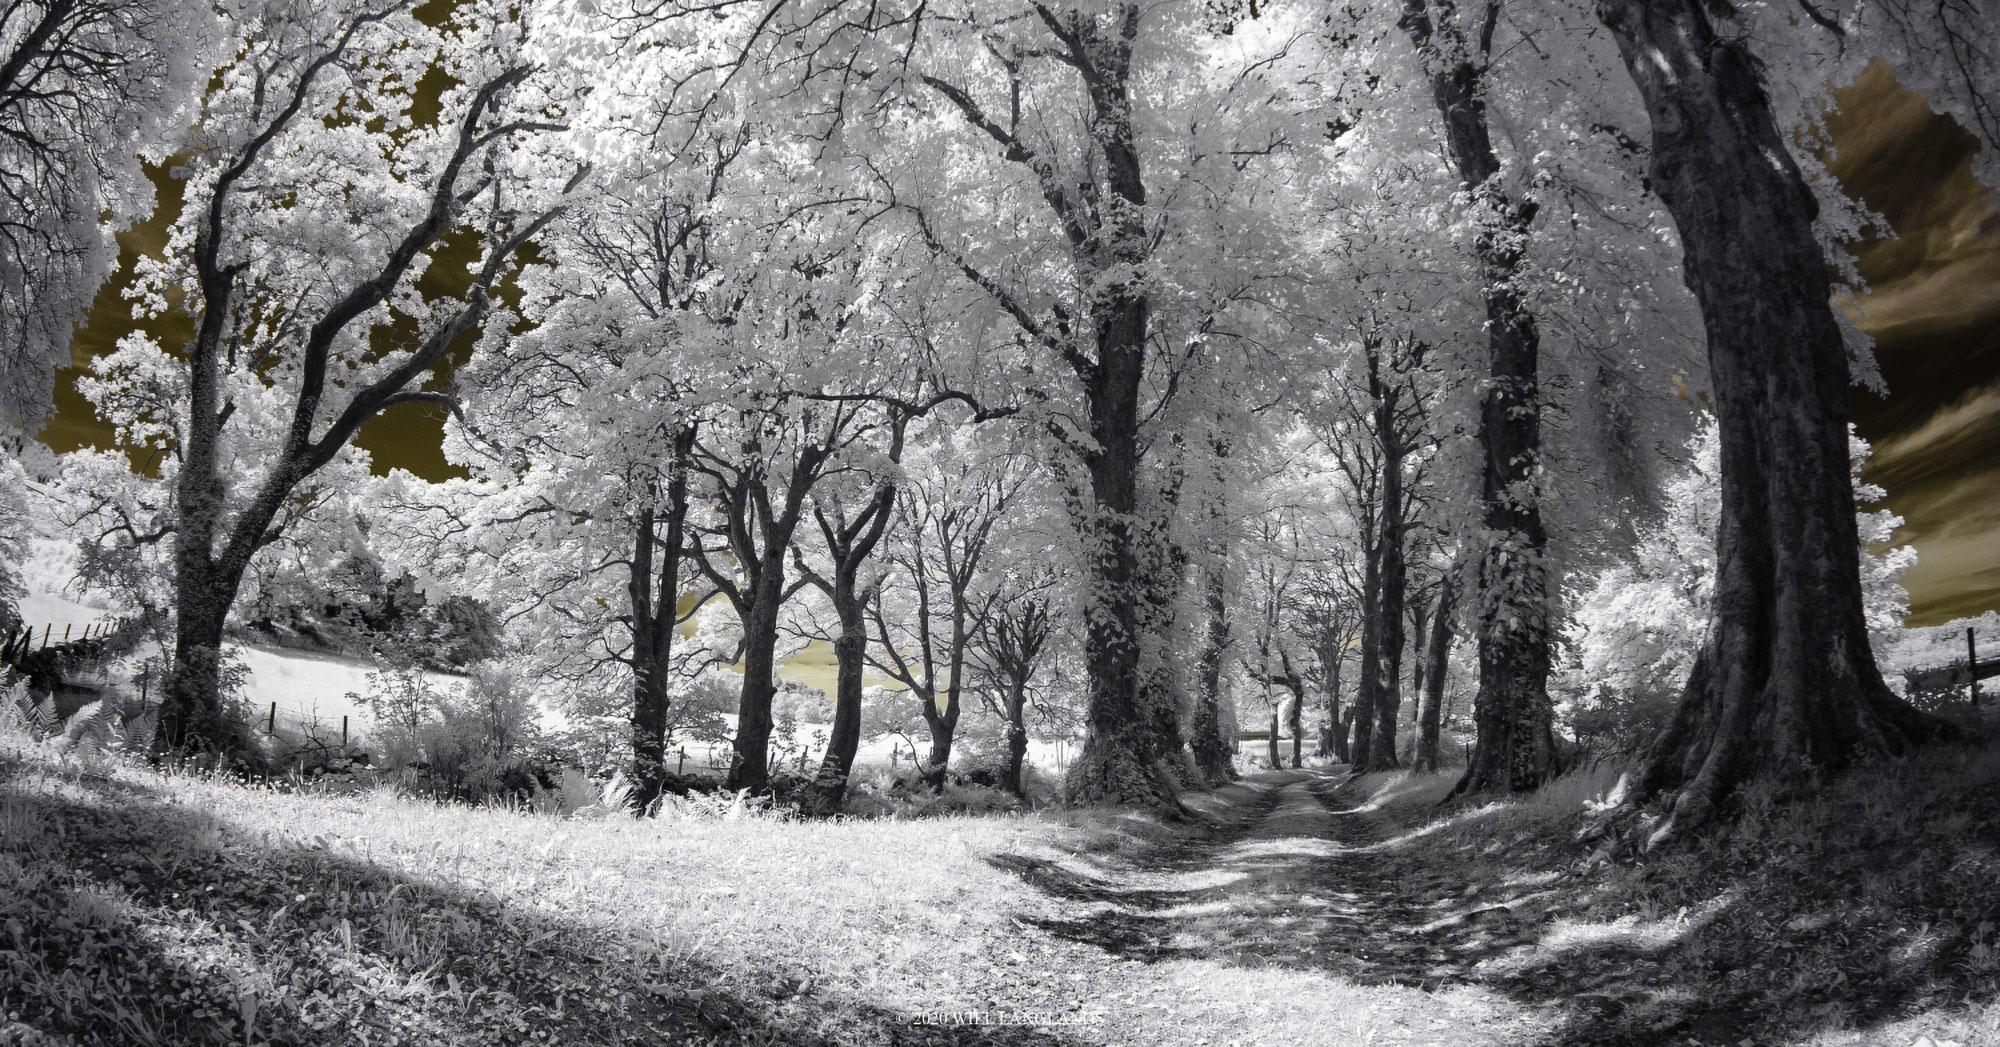 The Olympus EP2 and Infrared Photography